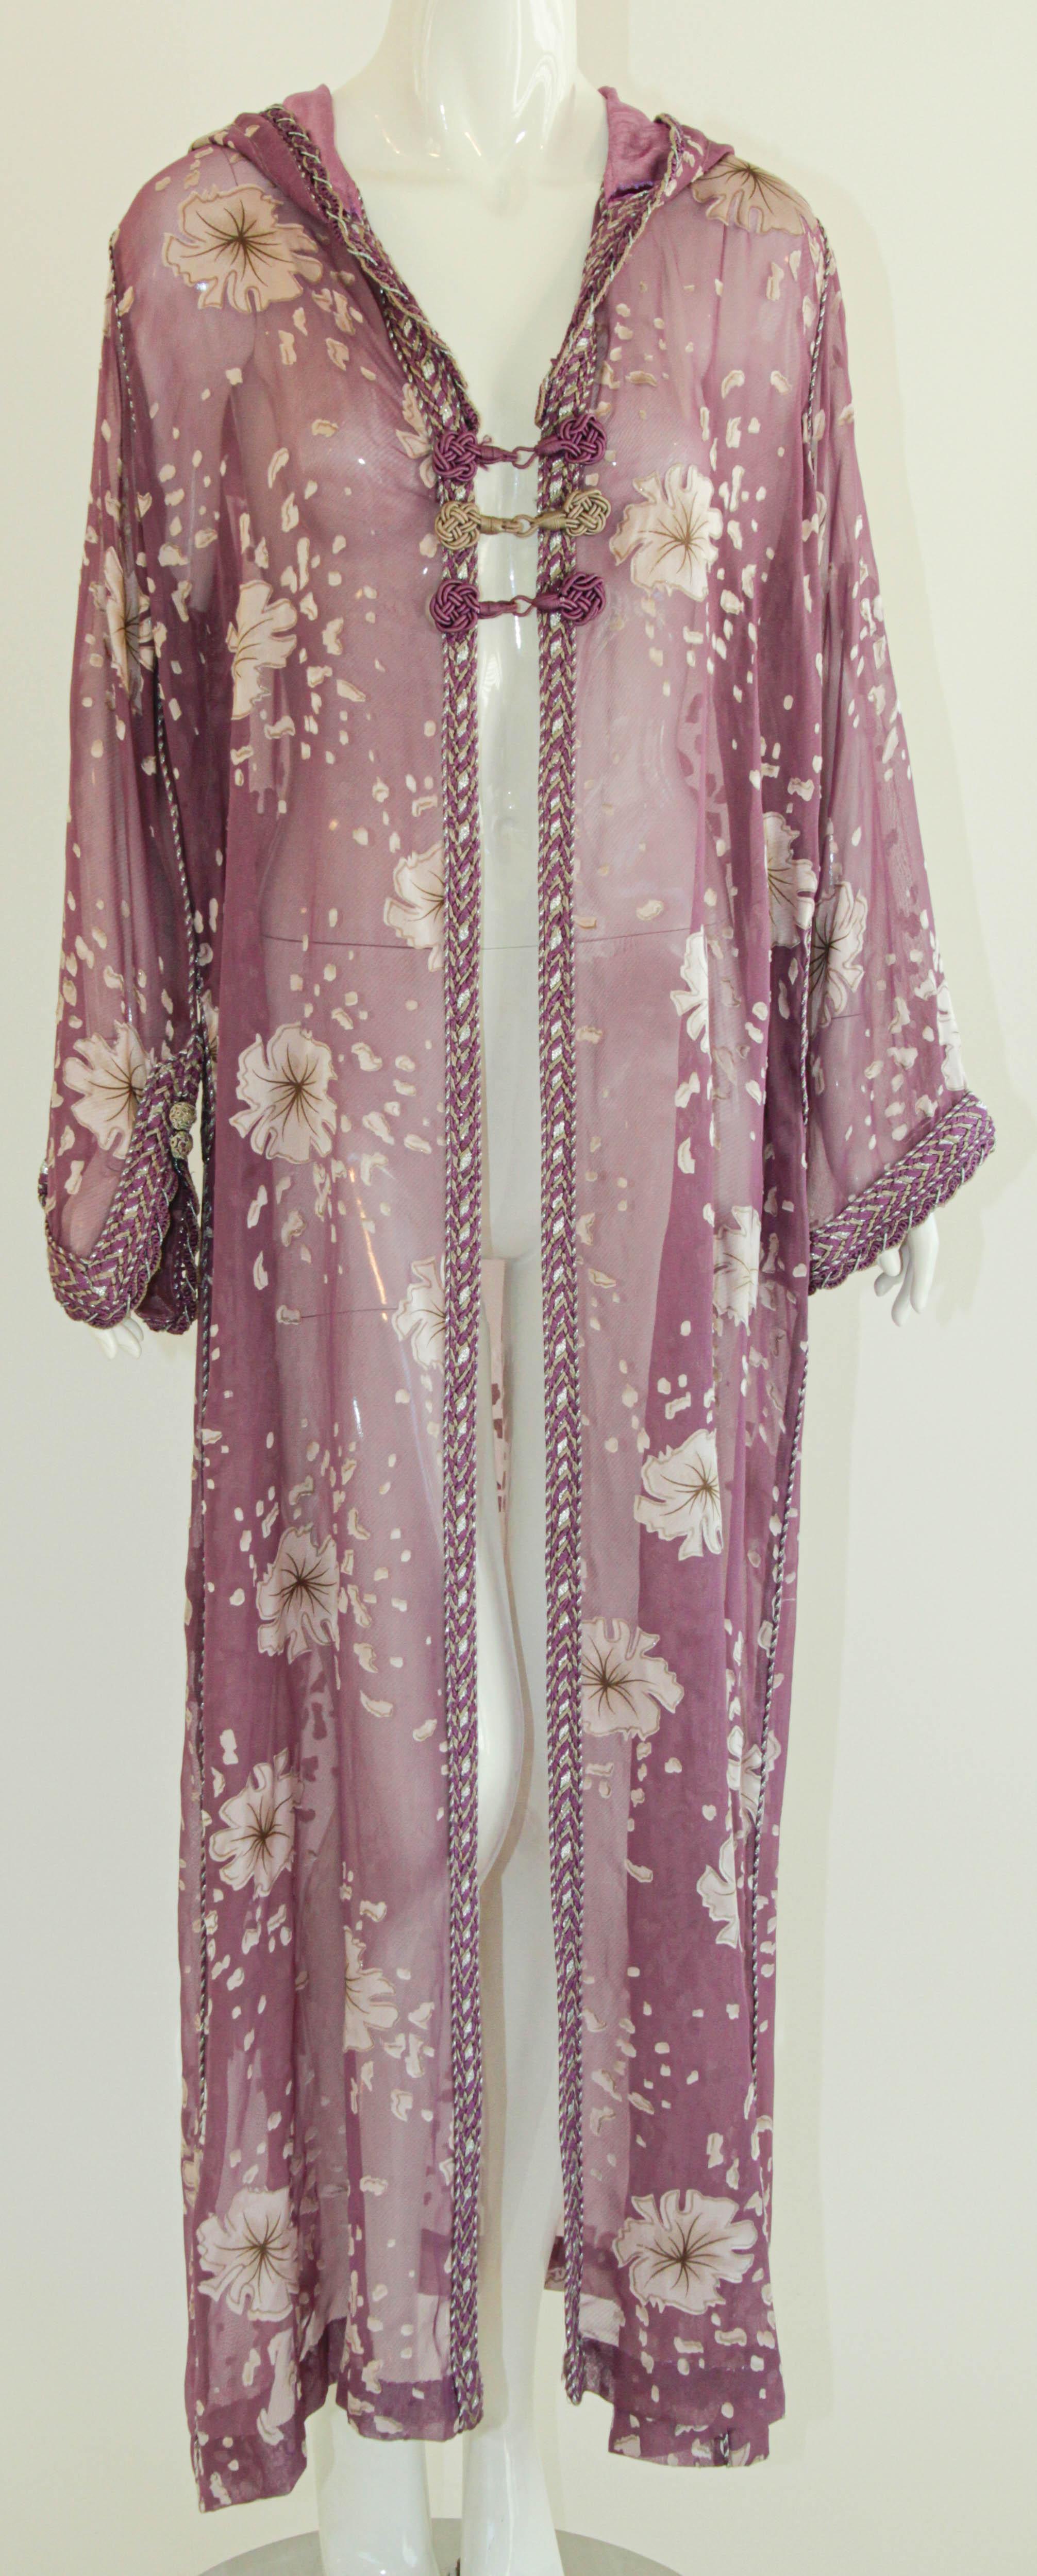 Elegant Moroccan caftan lavender floral georgette see trough fabric embroidered with purple trim,
This long maxi dress vintage kaftan trim is embroidered and braided entirely by hand.
Use it for summer as a cover up around the pool or at the beach,